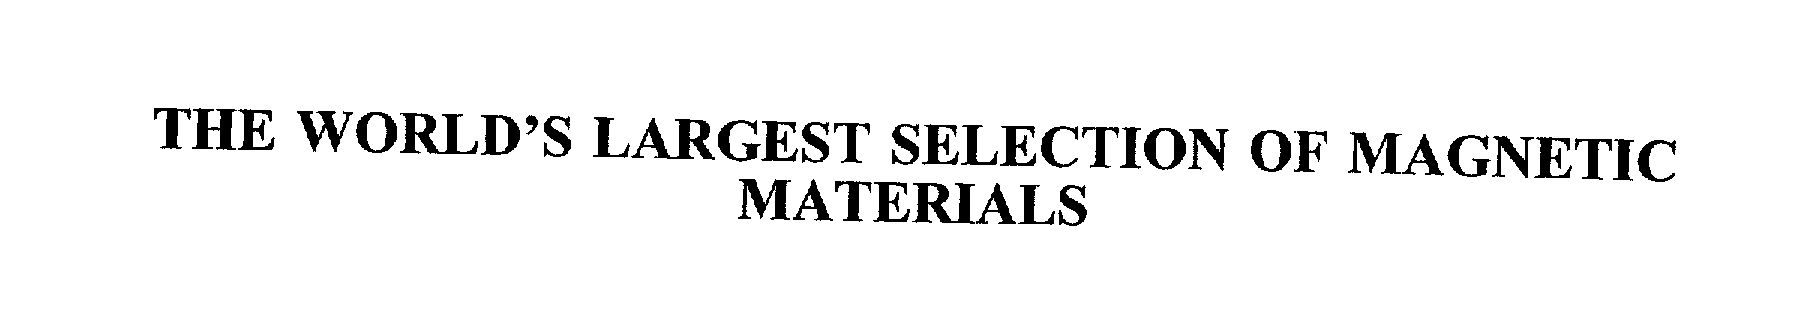 Trademark Logo THE WORLD'S LARGEST SELECTION OF MAGNETIC MATERIALS